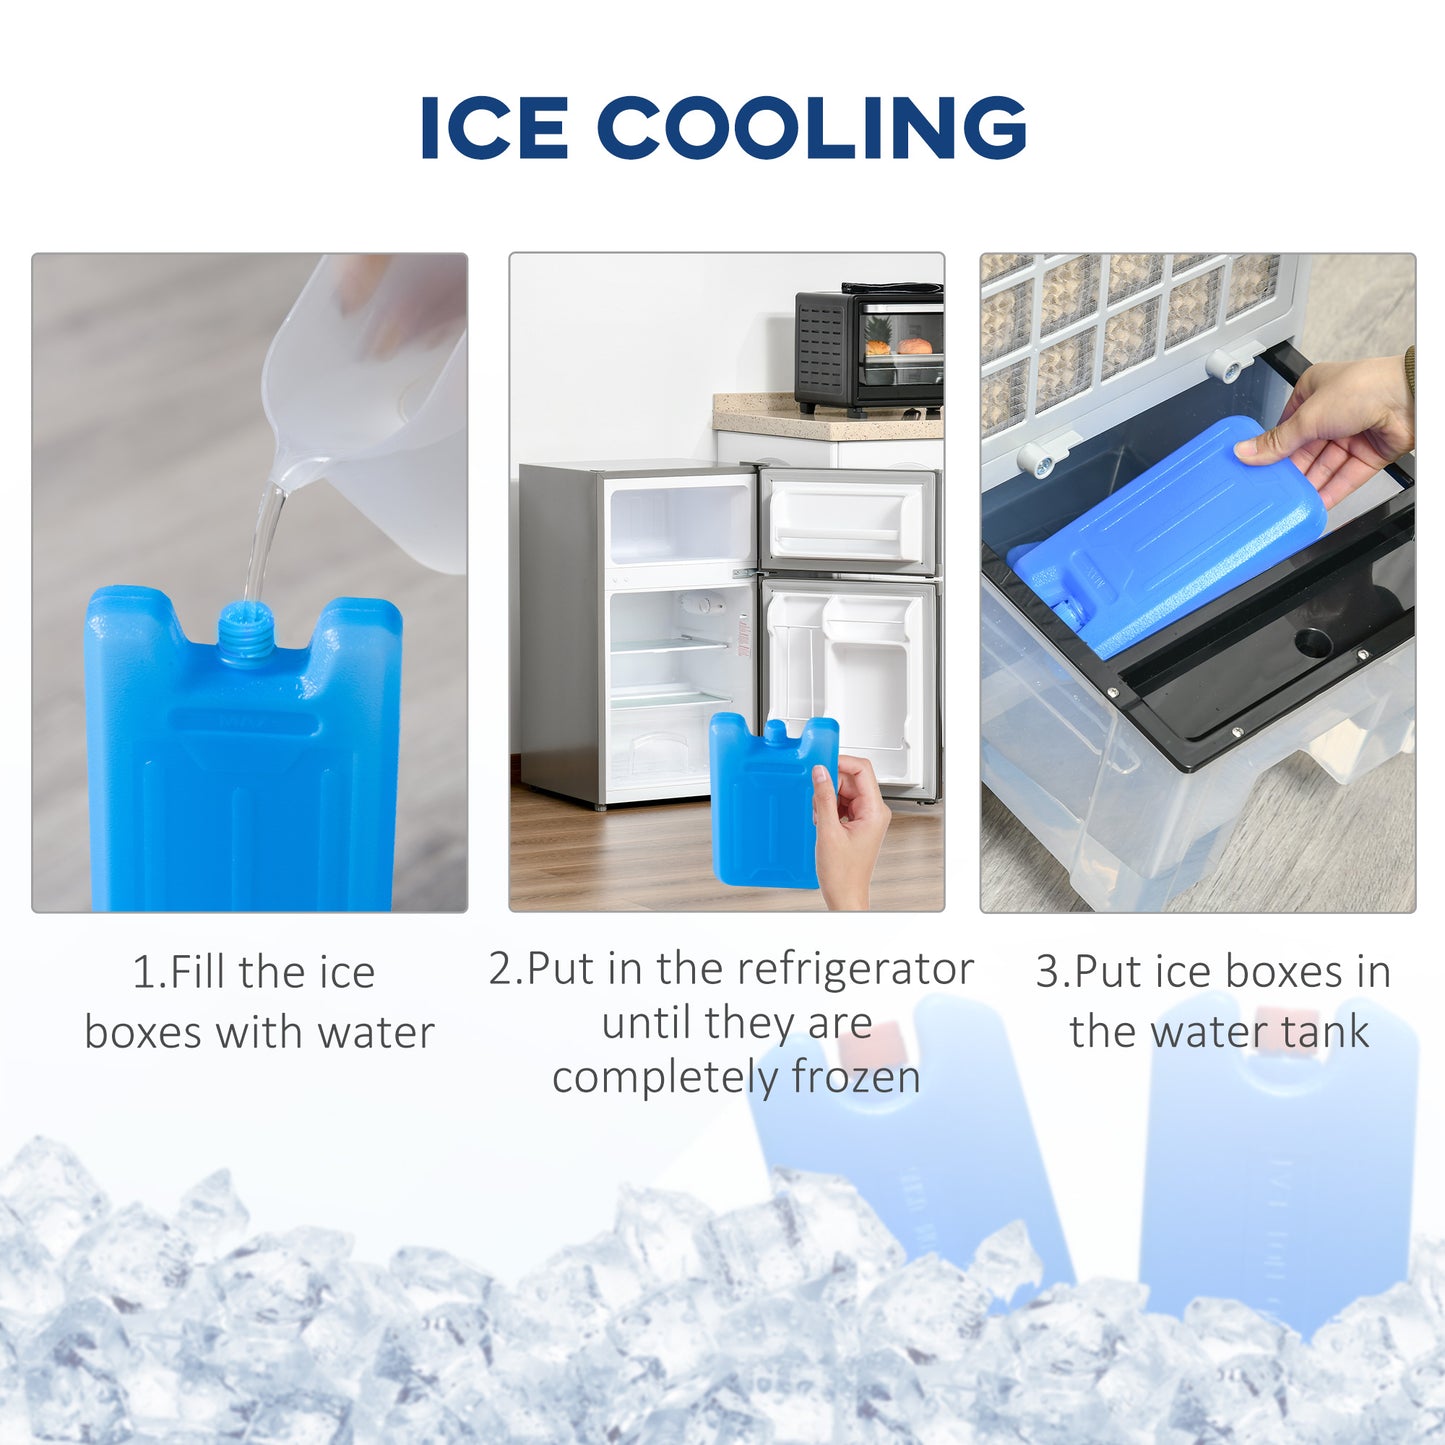 HOMCOM 32" Mobile Air Cooler, Evaporative Anion Ice Cooling Fan Water Conditioner Humidifier Unit w/3 Modes, Remote Controller, Timer for Home Bedroom